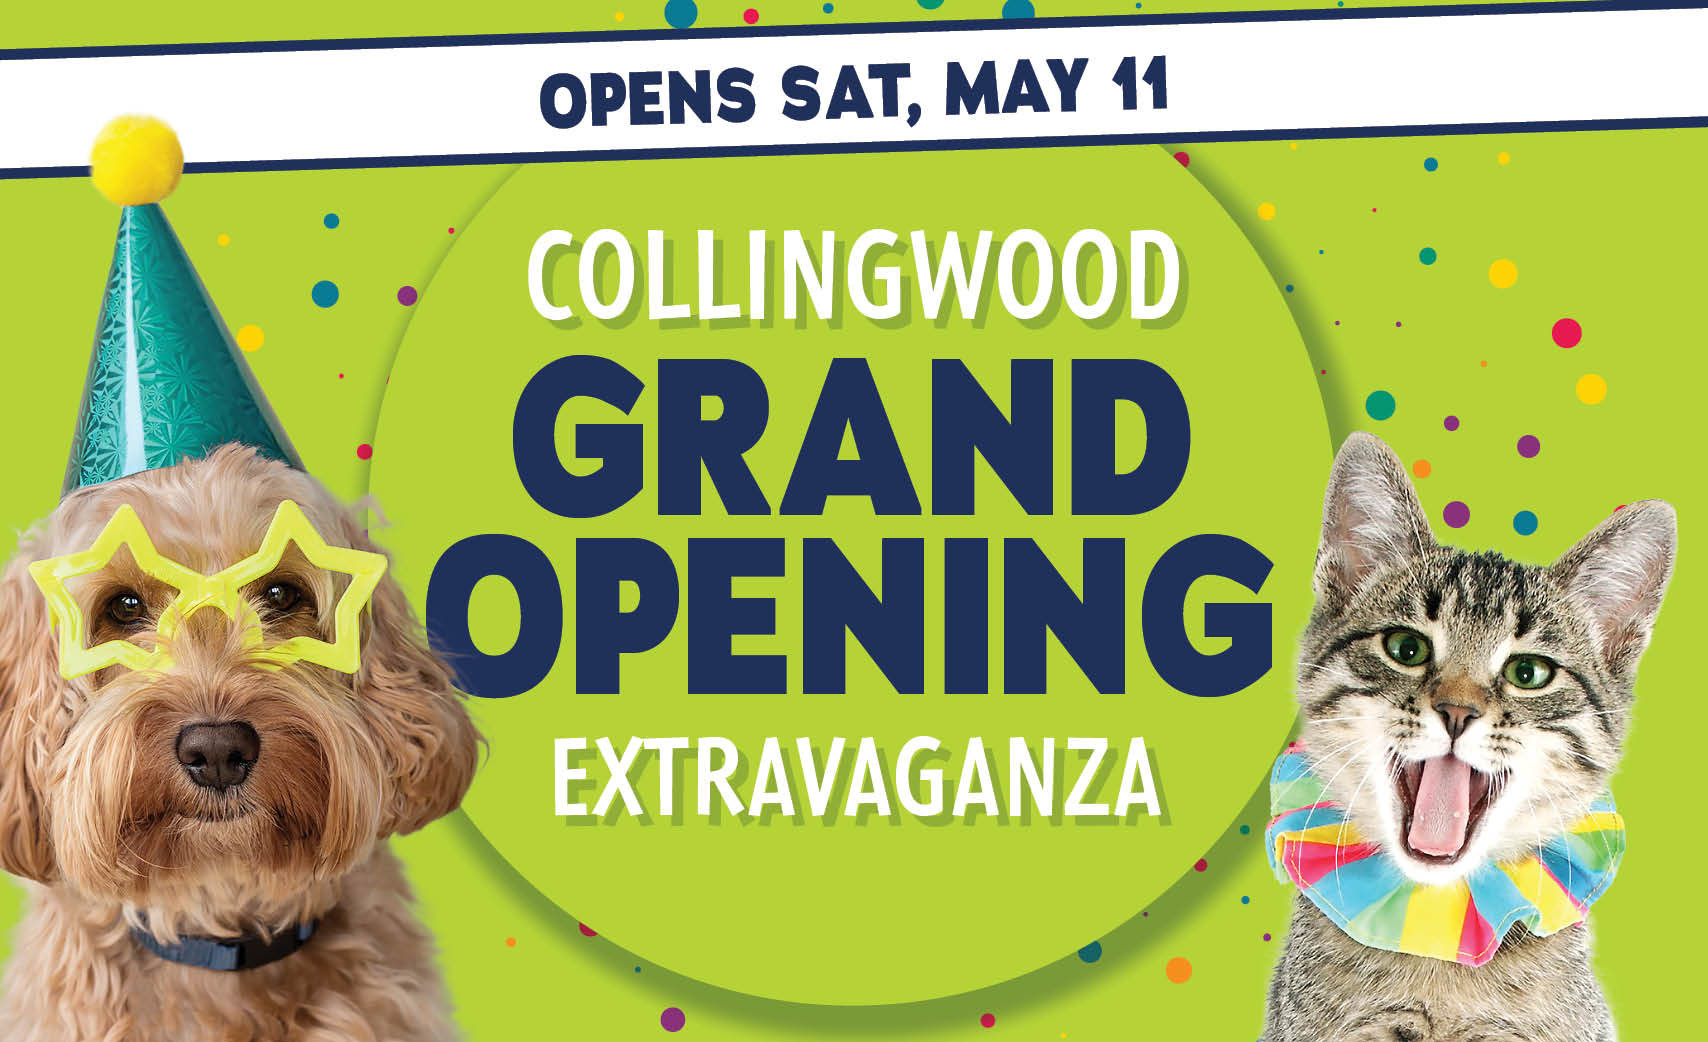 Ren's Pets is coming to Collingwood on May 11th!